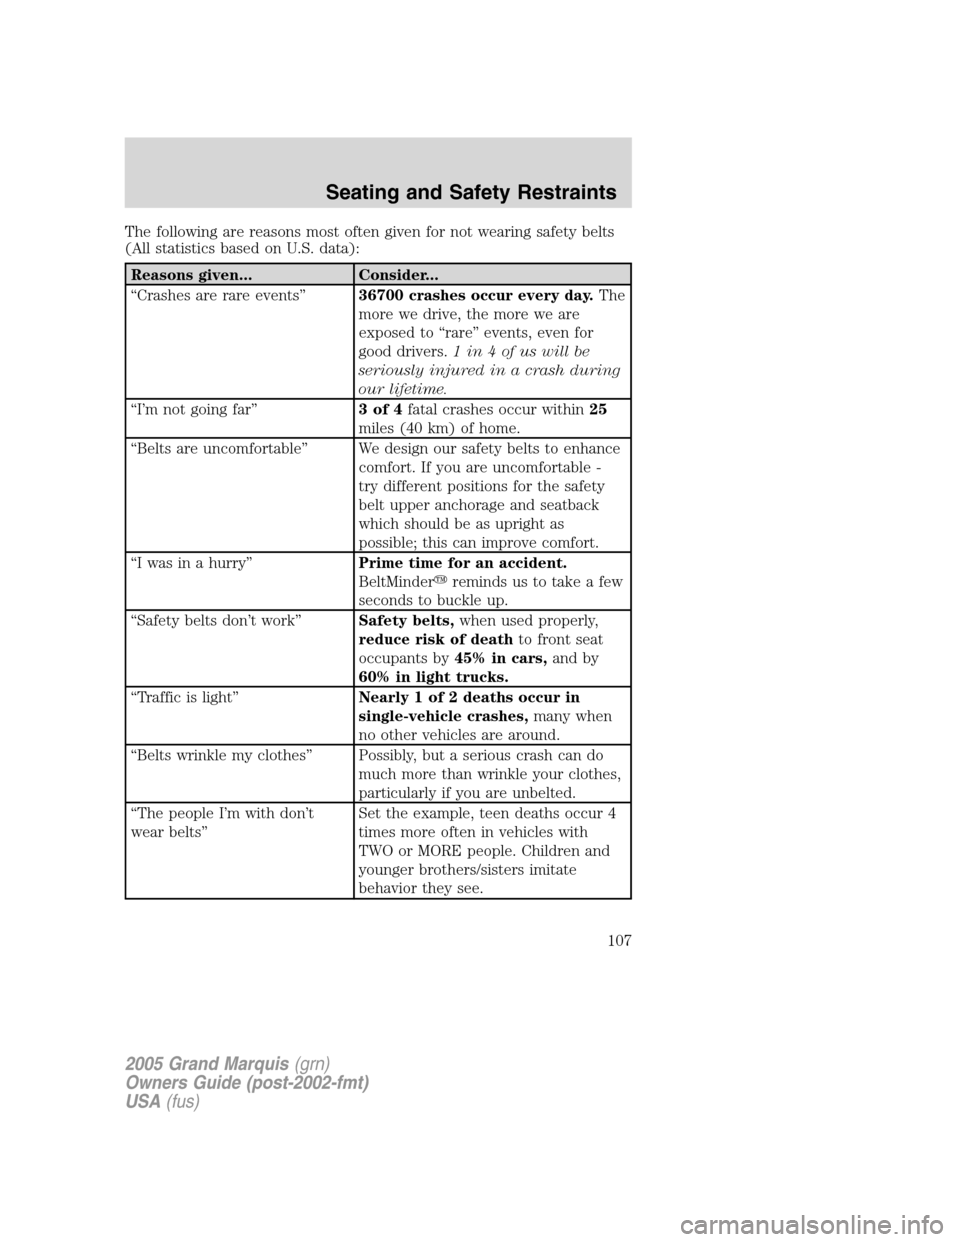 Mercury Grand Marquis 2005  Owners Manuals The following are reasons most often given for not wearing safety belts
(All statistics based on U.S. data):
Reasons given... Consider...
“Crashes are rare events”36700 crashes occur every day.The